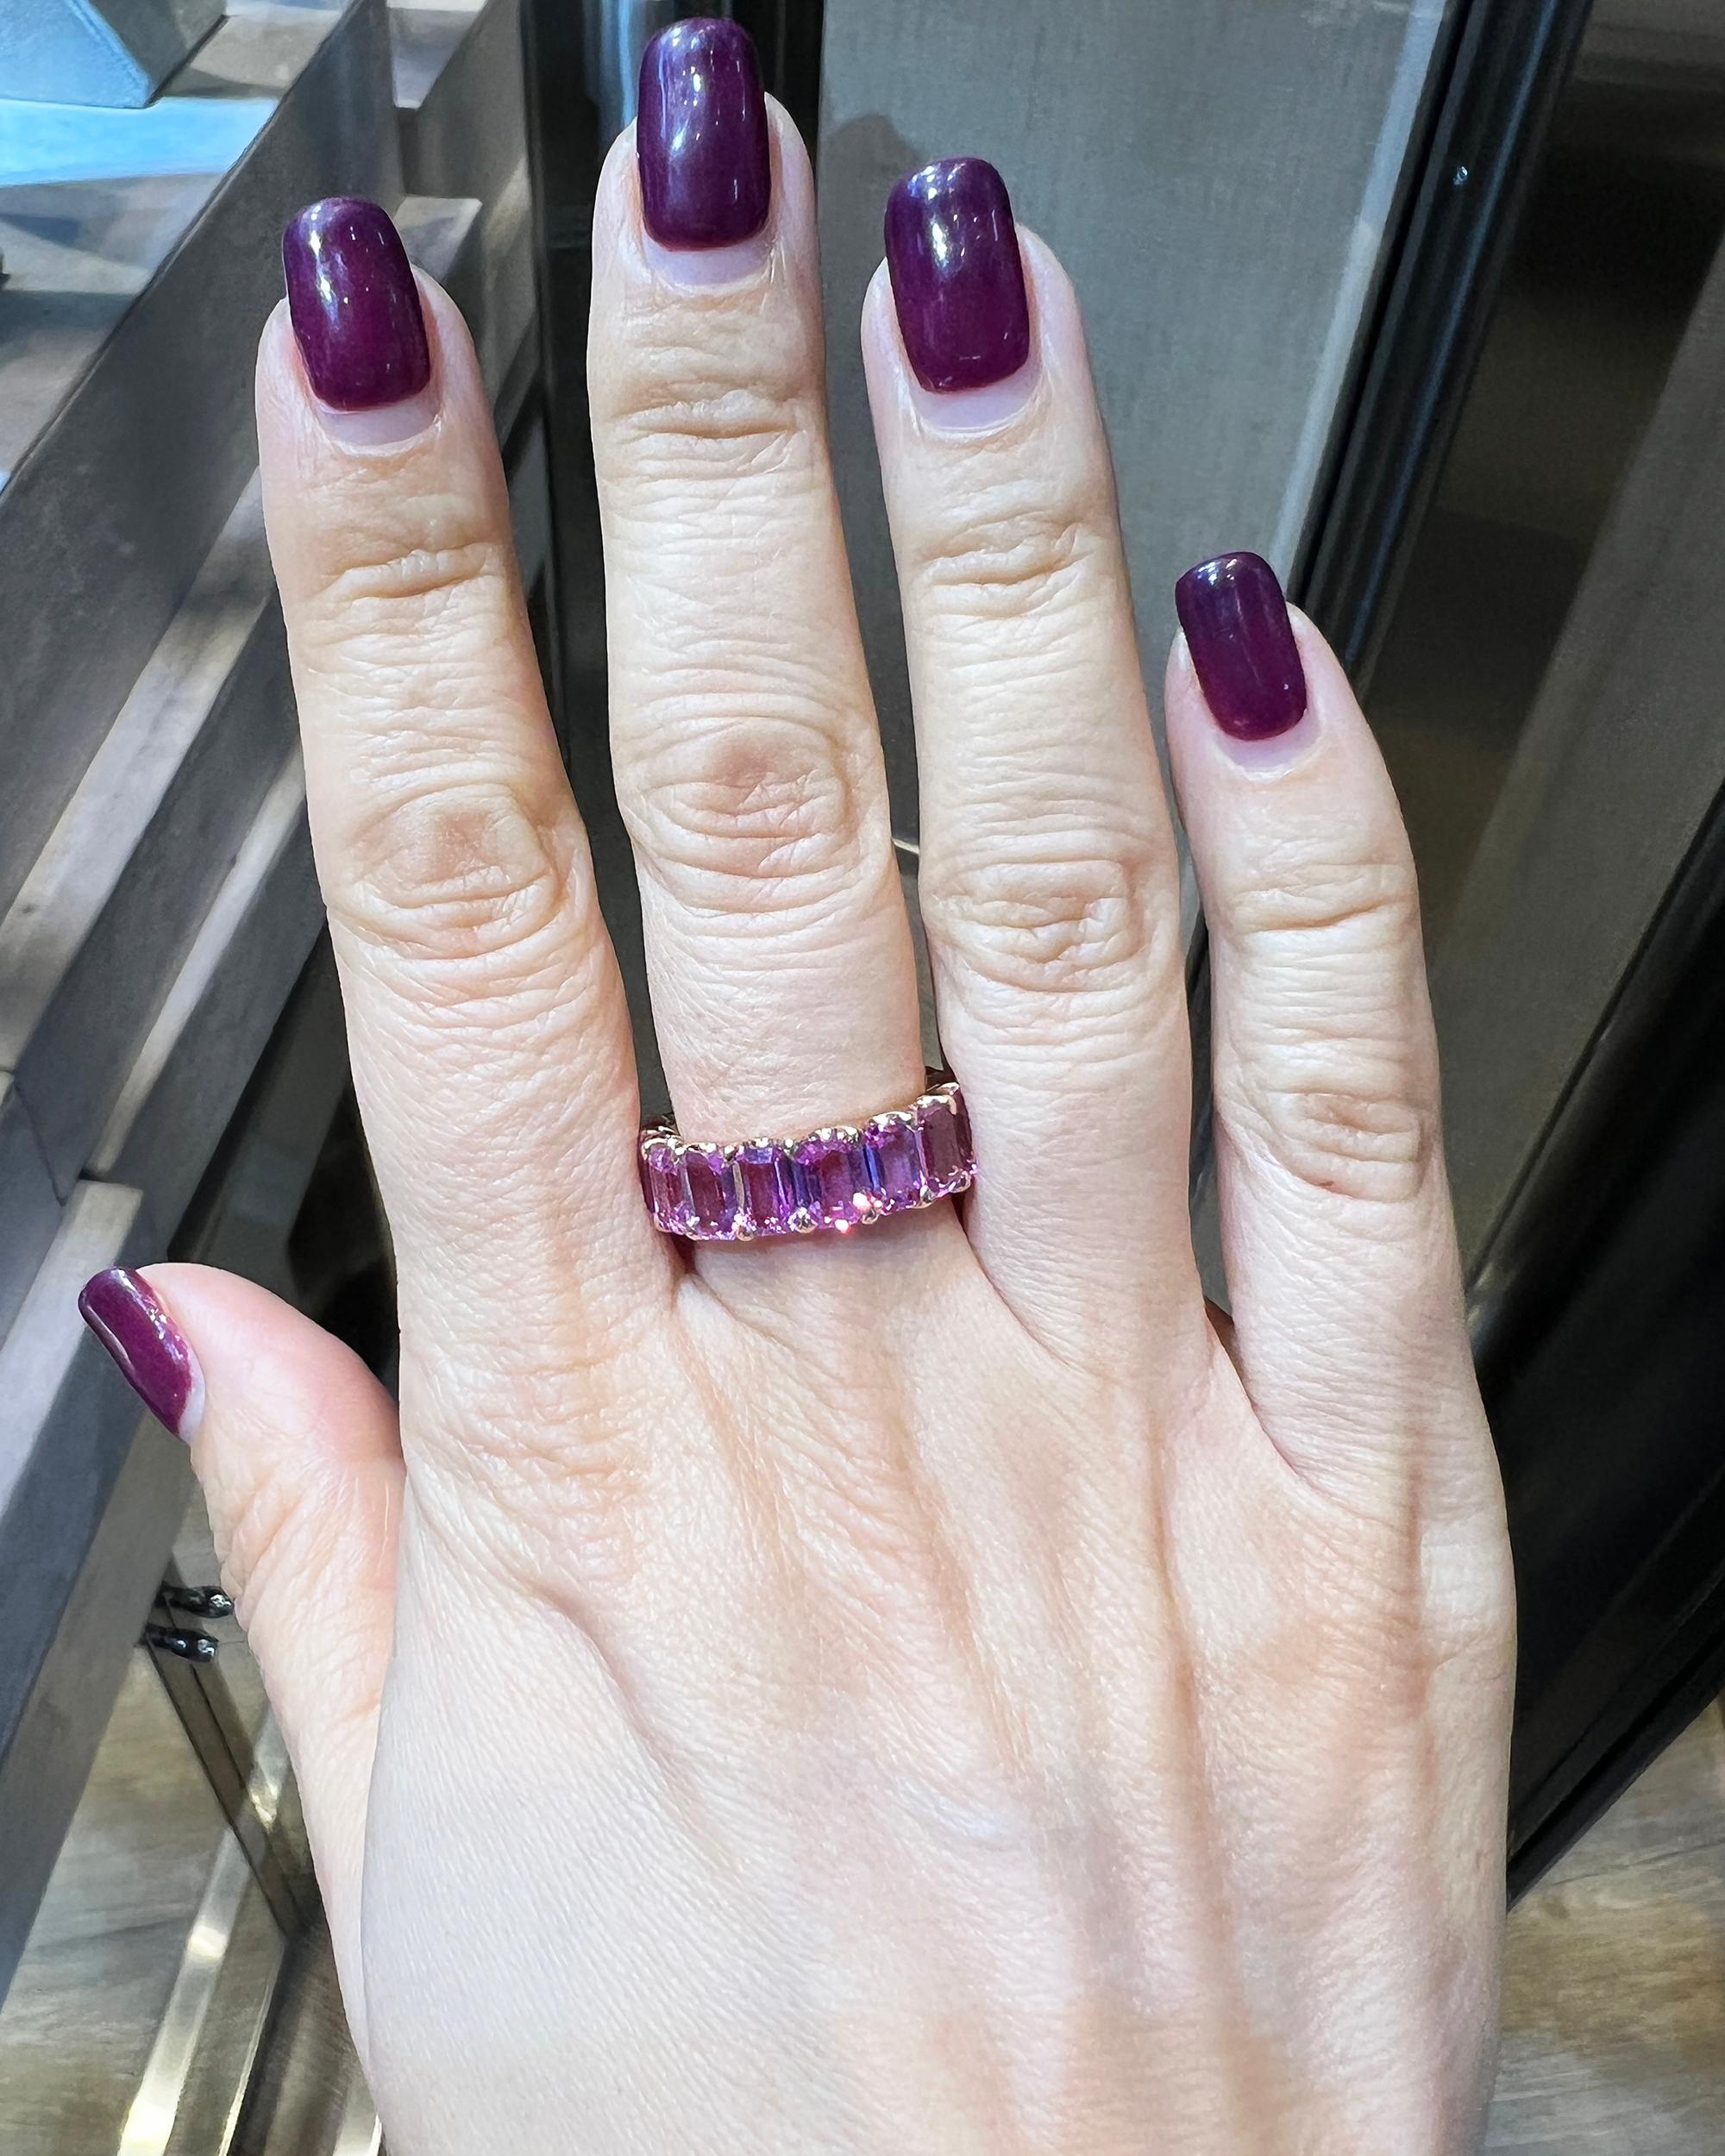 A fancy eternity ring comprising of 17 emerald-cut pink sapphires weighing a total of 10.43 carats. Average weight of each stone is 0.61 carat. The sapphires are all natural, not certified.
18k rose gold, gross weight is 7.13 gram.
Size 6.5. Not